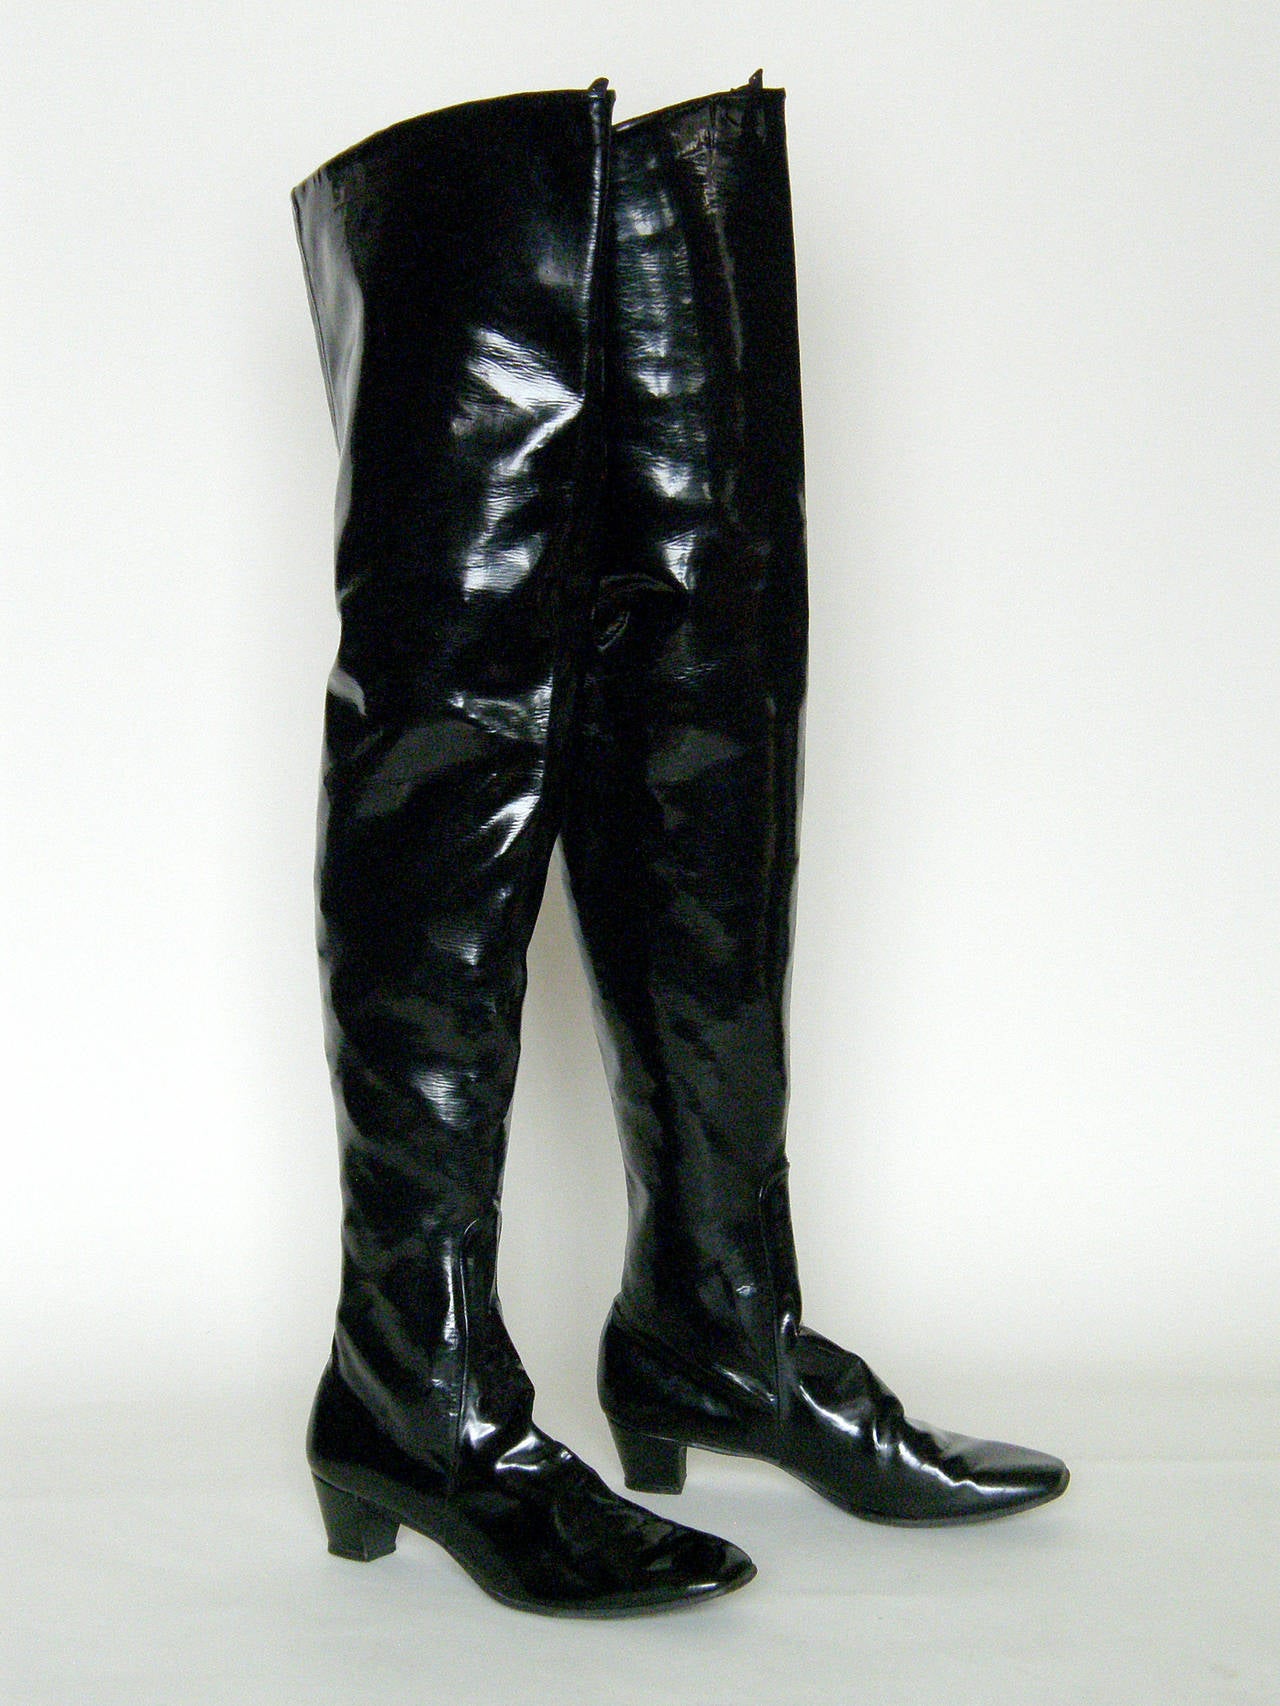 Sexy, thigh high Beth Levine boots in glossy black, stretch vinyl. Beth Levine was renowned for her boot designs in the mini skirt era. She designed the boots that Nancy Sinatra wore to sing 